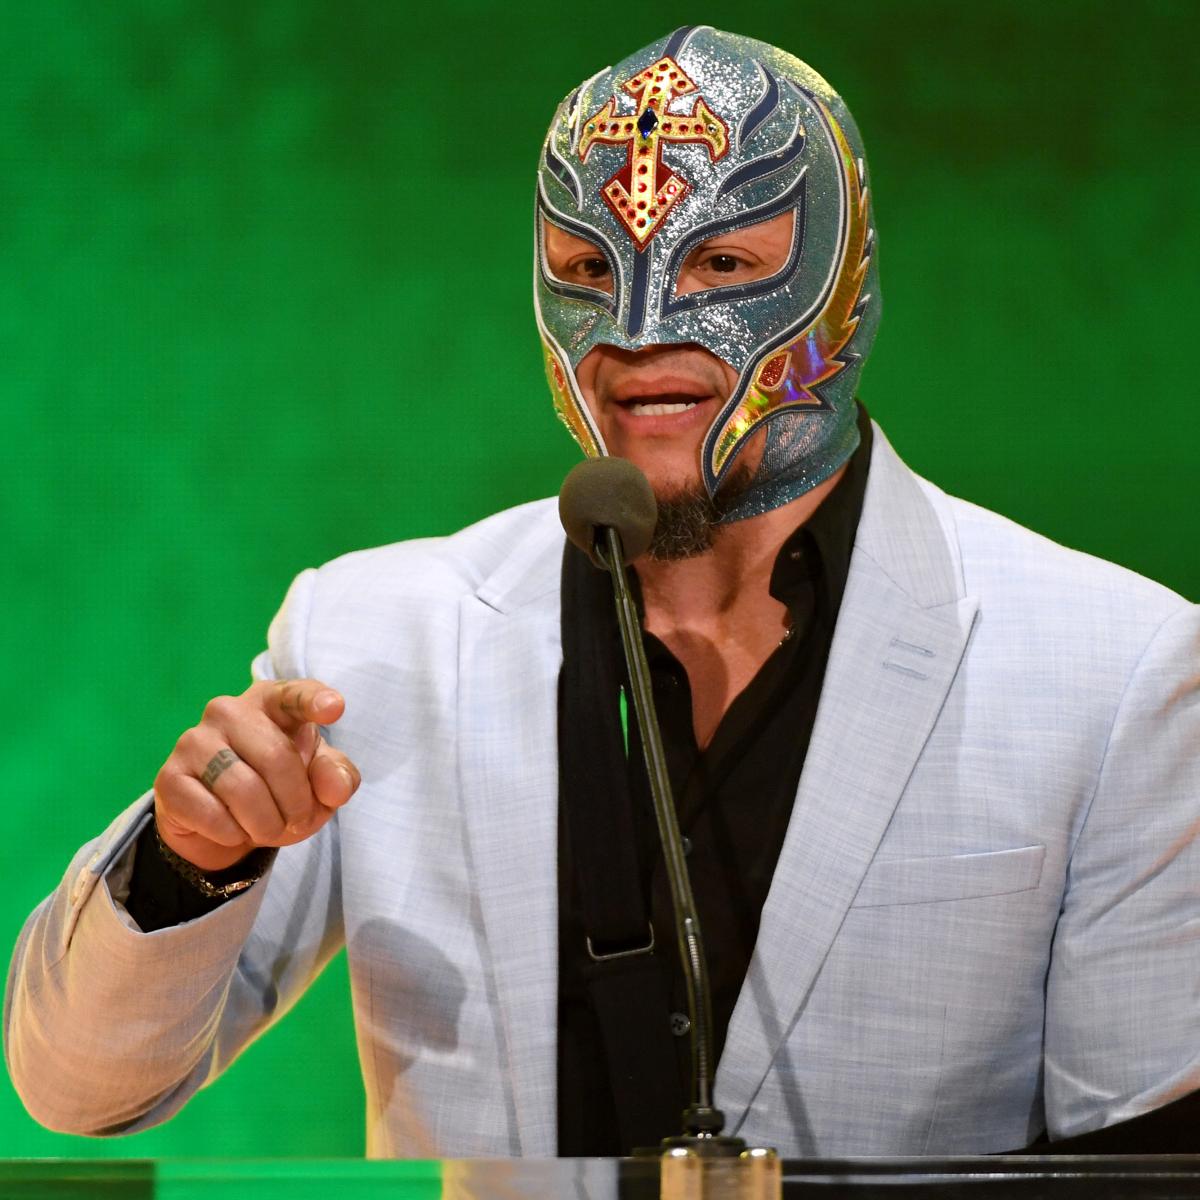 Rey Mysterio Retirement Ceremony to Be Held During WWE Raw on June 1.